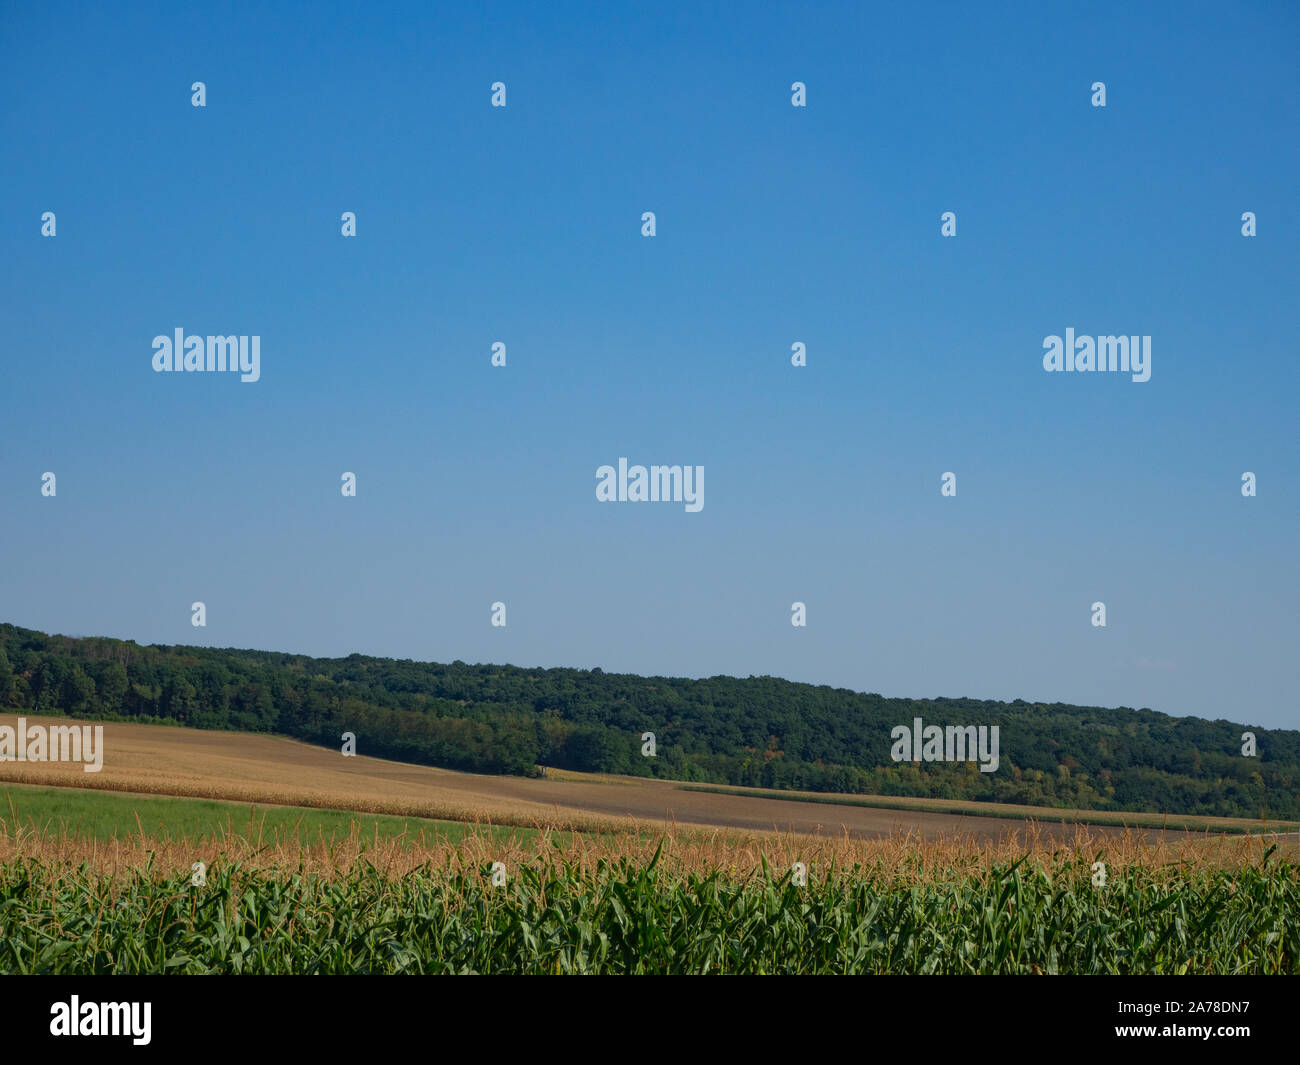 Agriculture fields and forest in hilly country Stock Photo